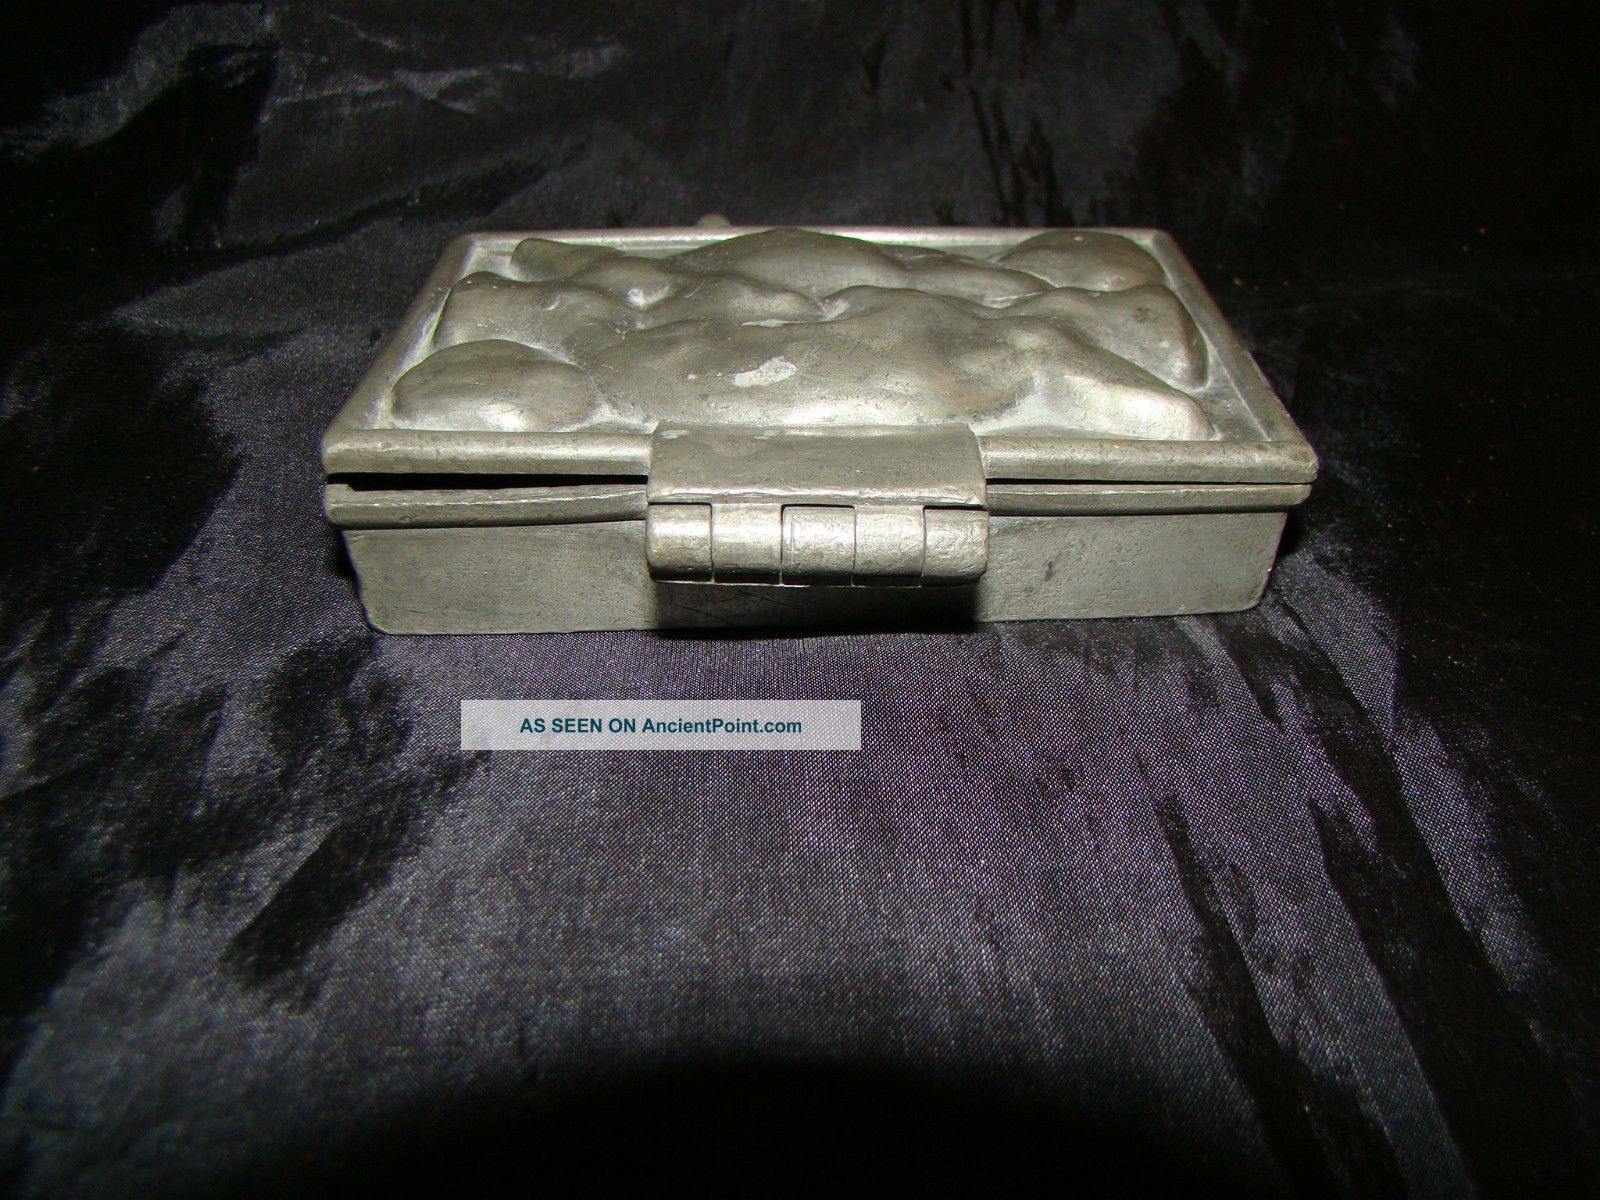  - antique_pewter_king_of_clubs_chocolate_or_ice_cream_mold_5_lgw